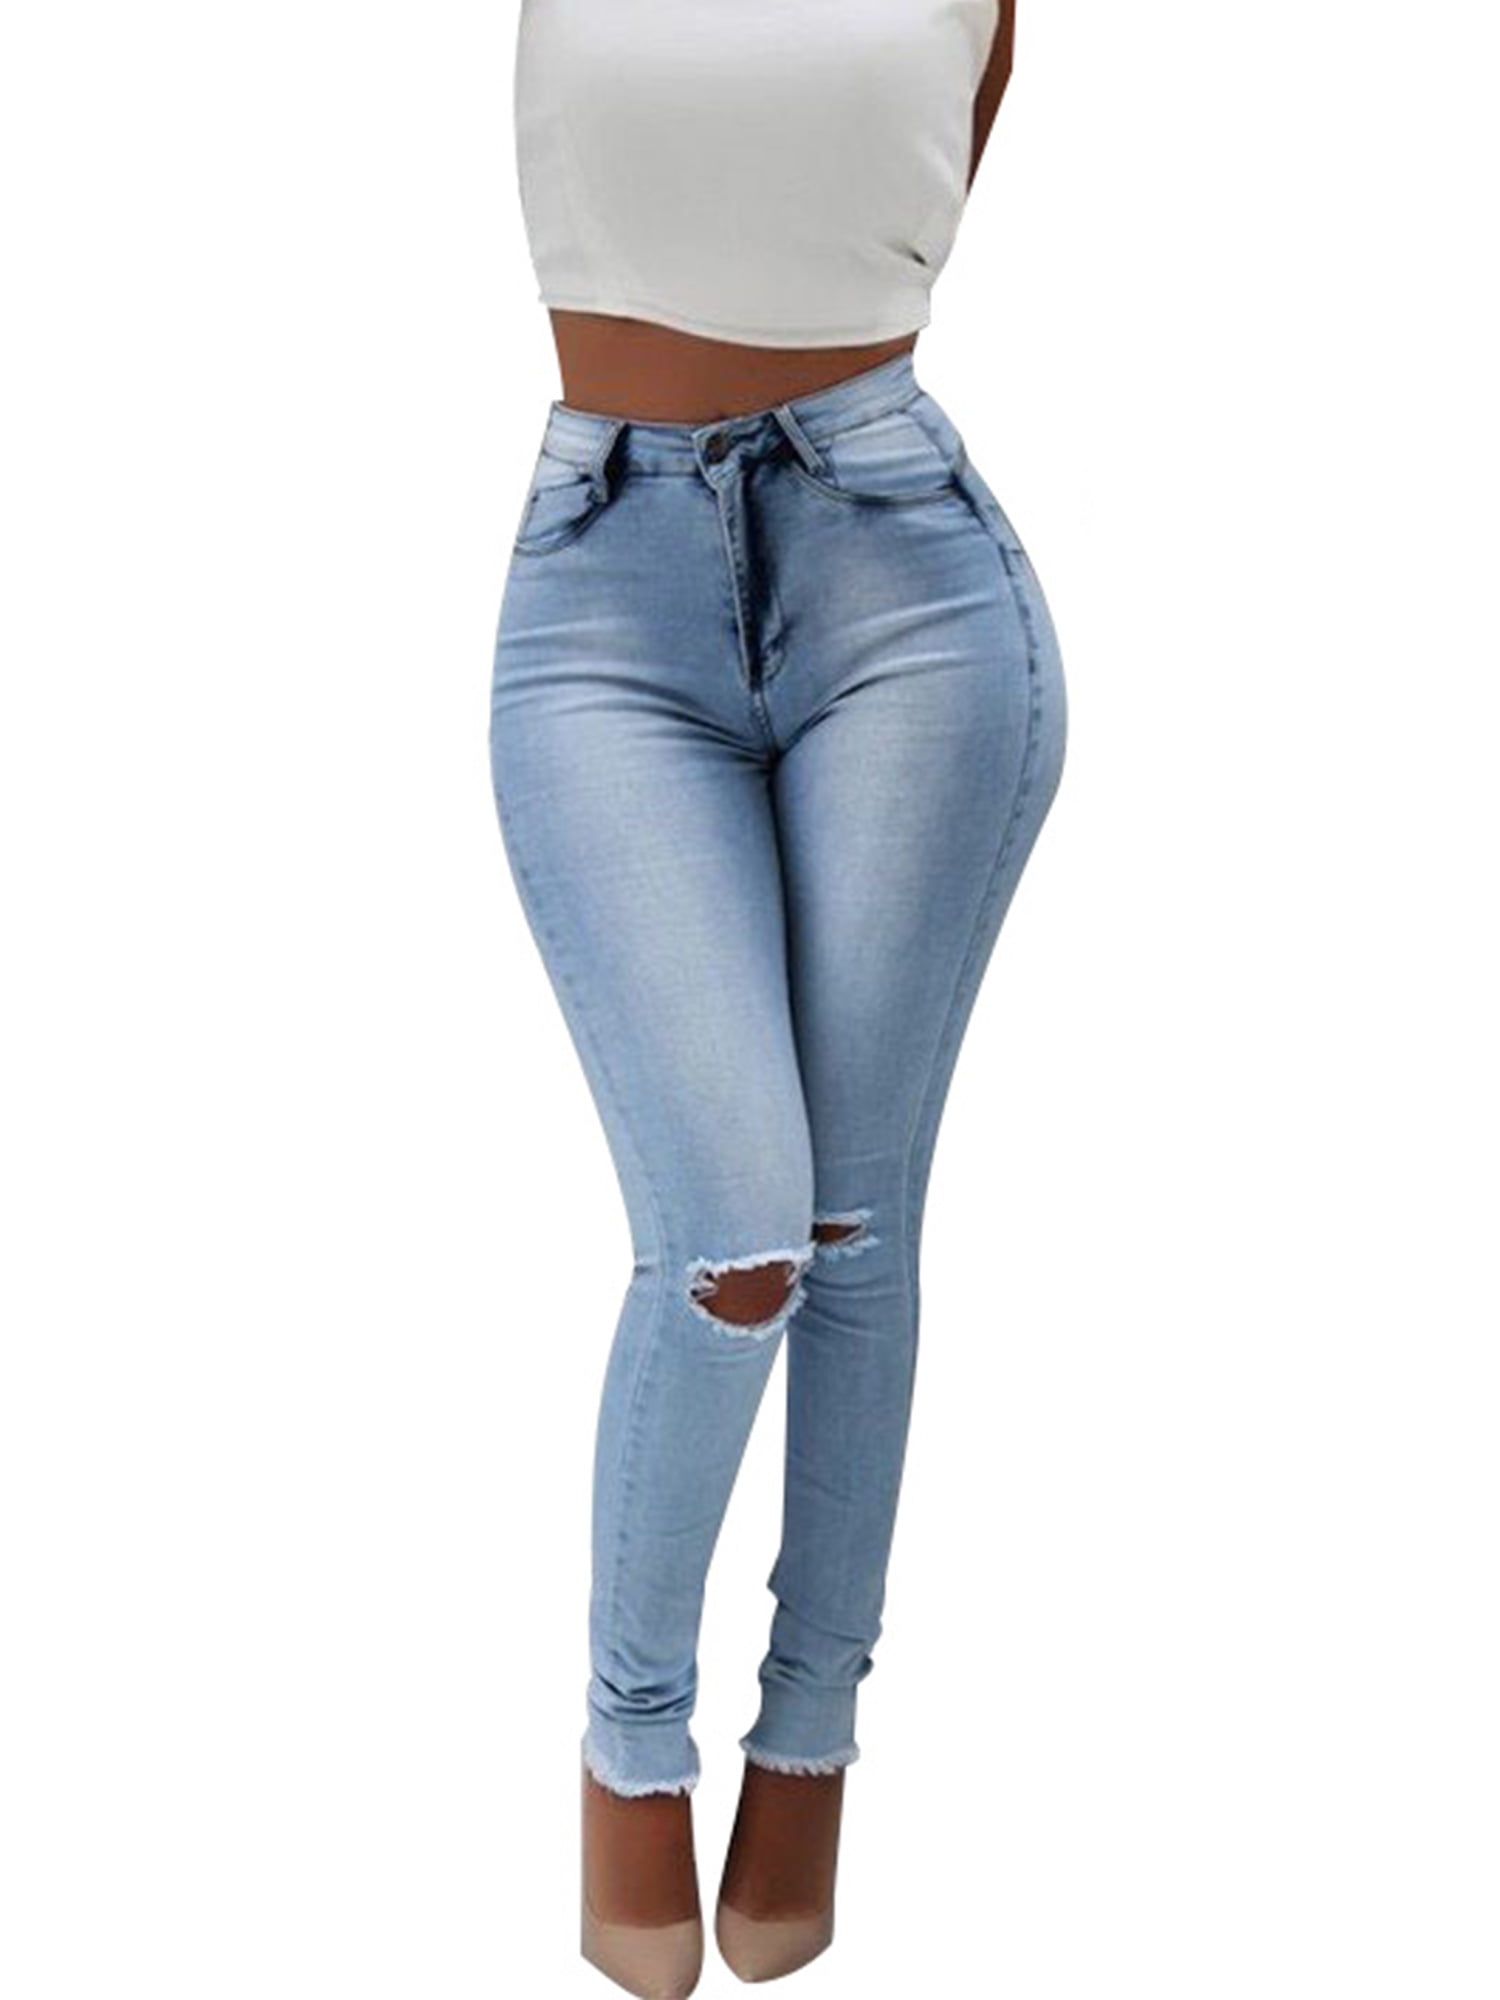 Women High Waisted Denim Jeans Stretchy Skinny Slim Ripped Pencil Trousers Pants 